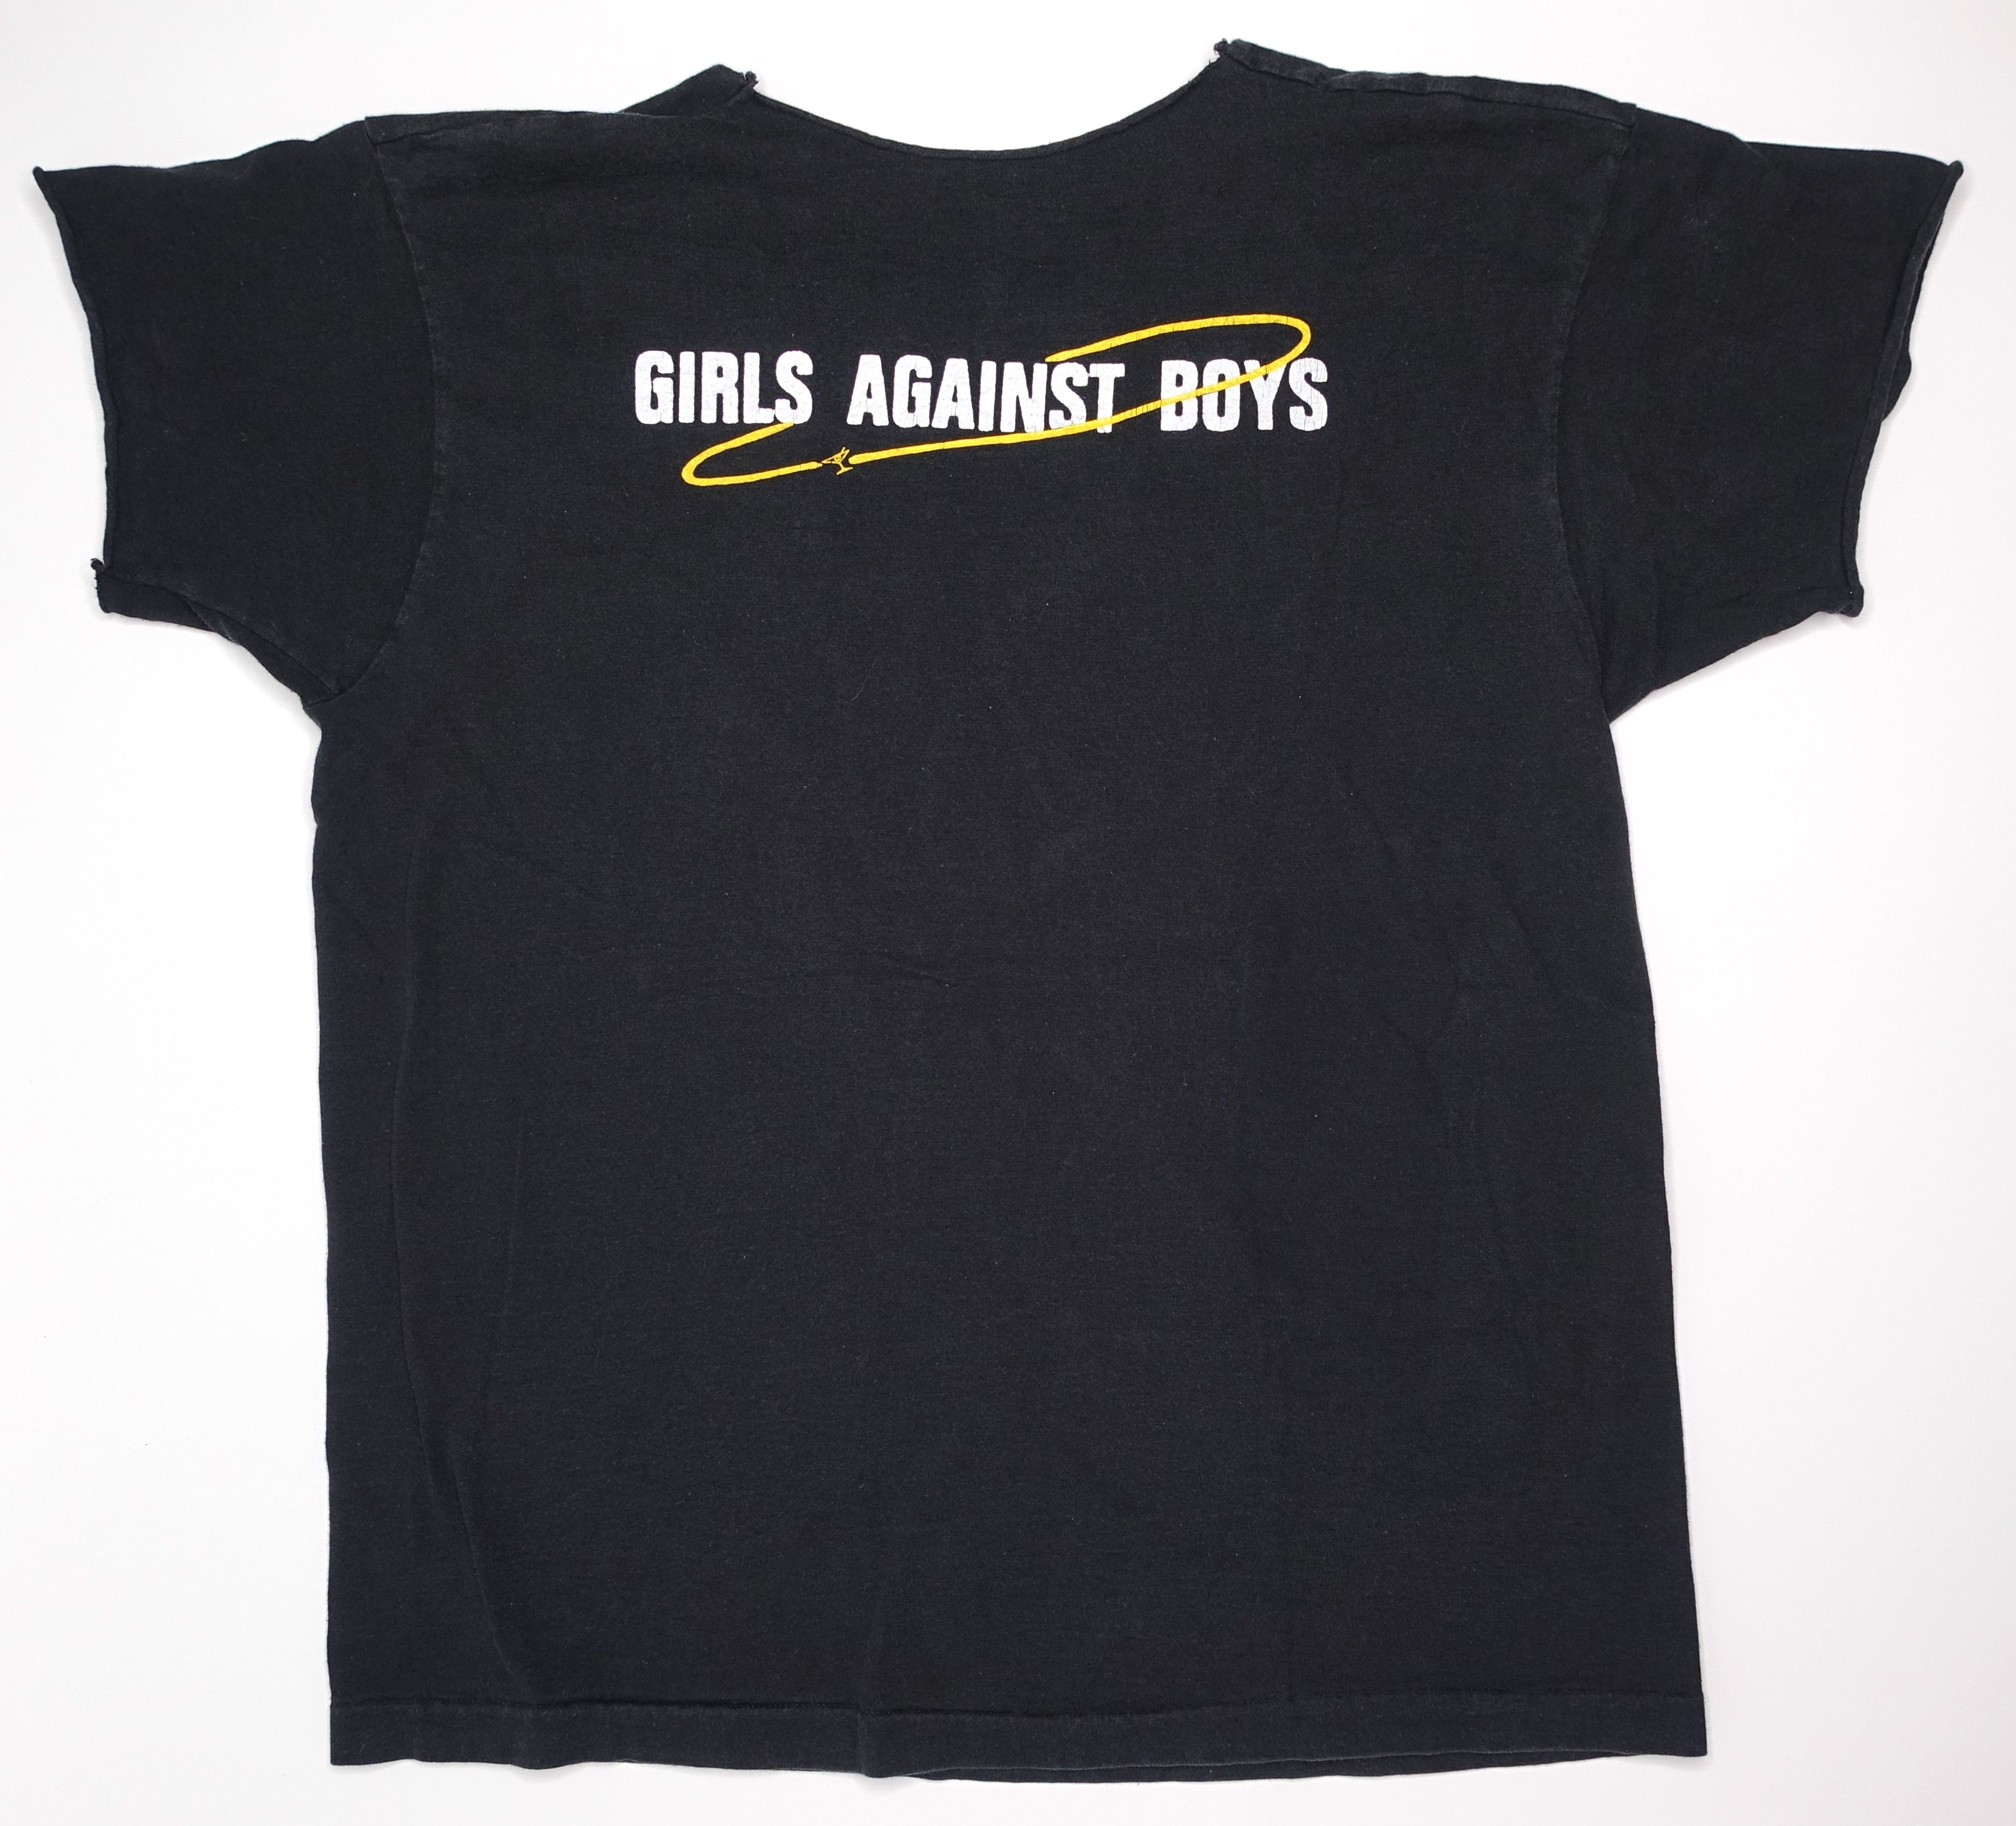 Girls Against Boys – Cruise Yourself 1994 Tour Shirt Size XL (Altered)